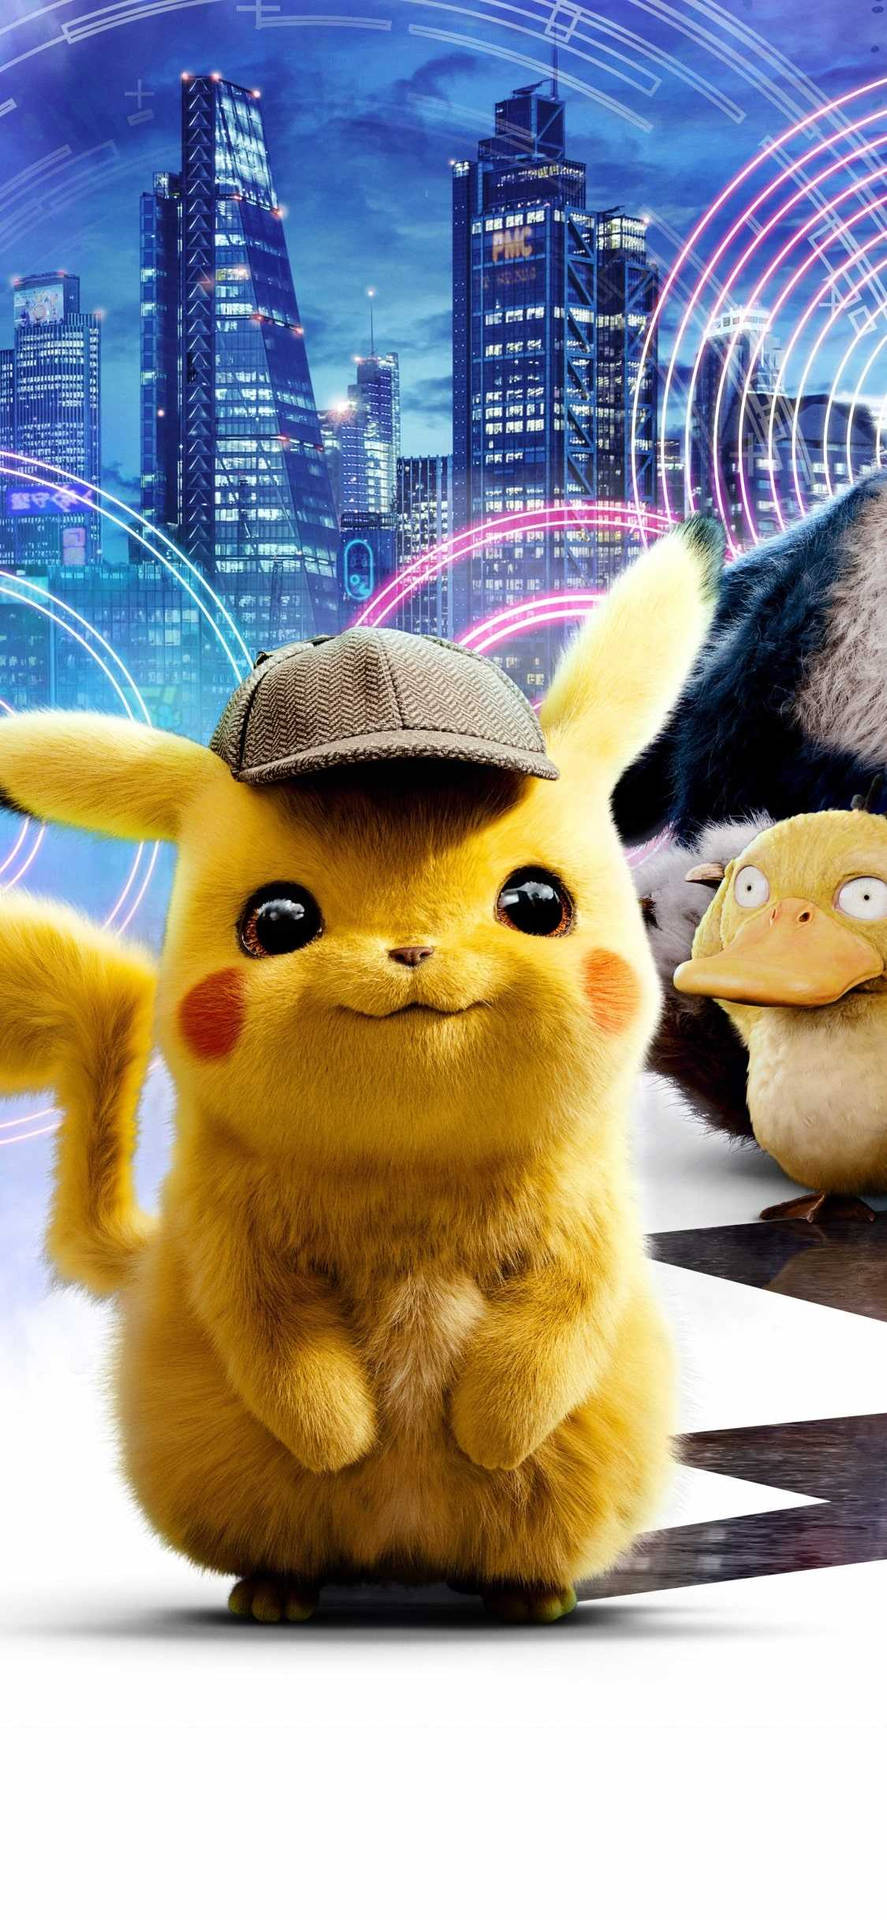 Pikachu And Psyduck Background